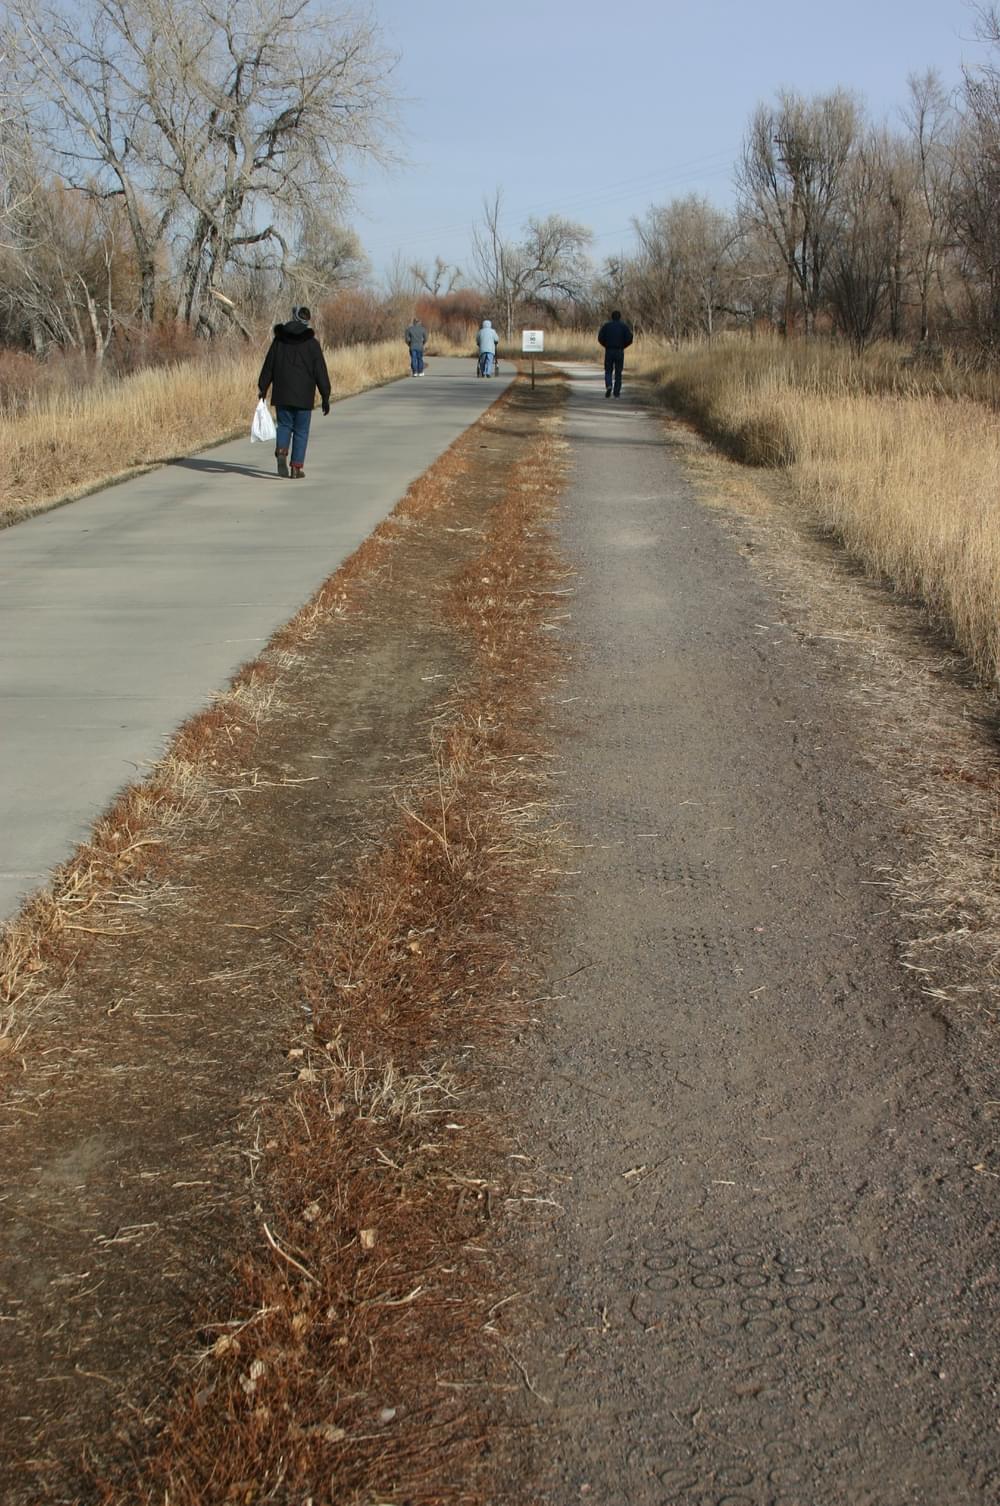 Slight separation between the adjoining treads, one concrete and the other natural surface often used by equestrians; Crown Hill Park trails in Wheat Ridge, Colorado